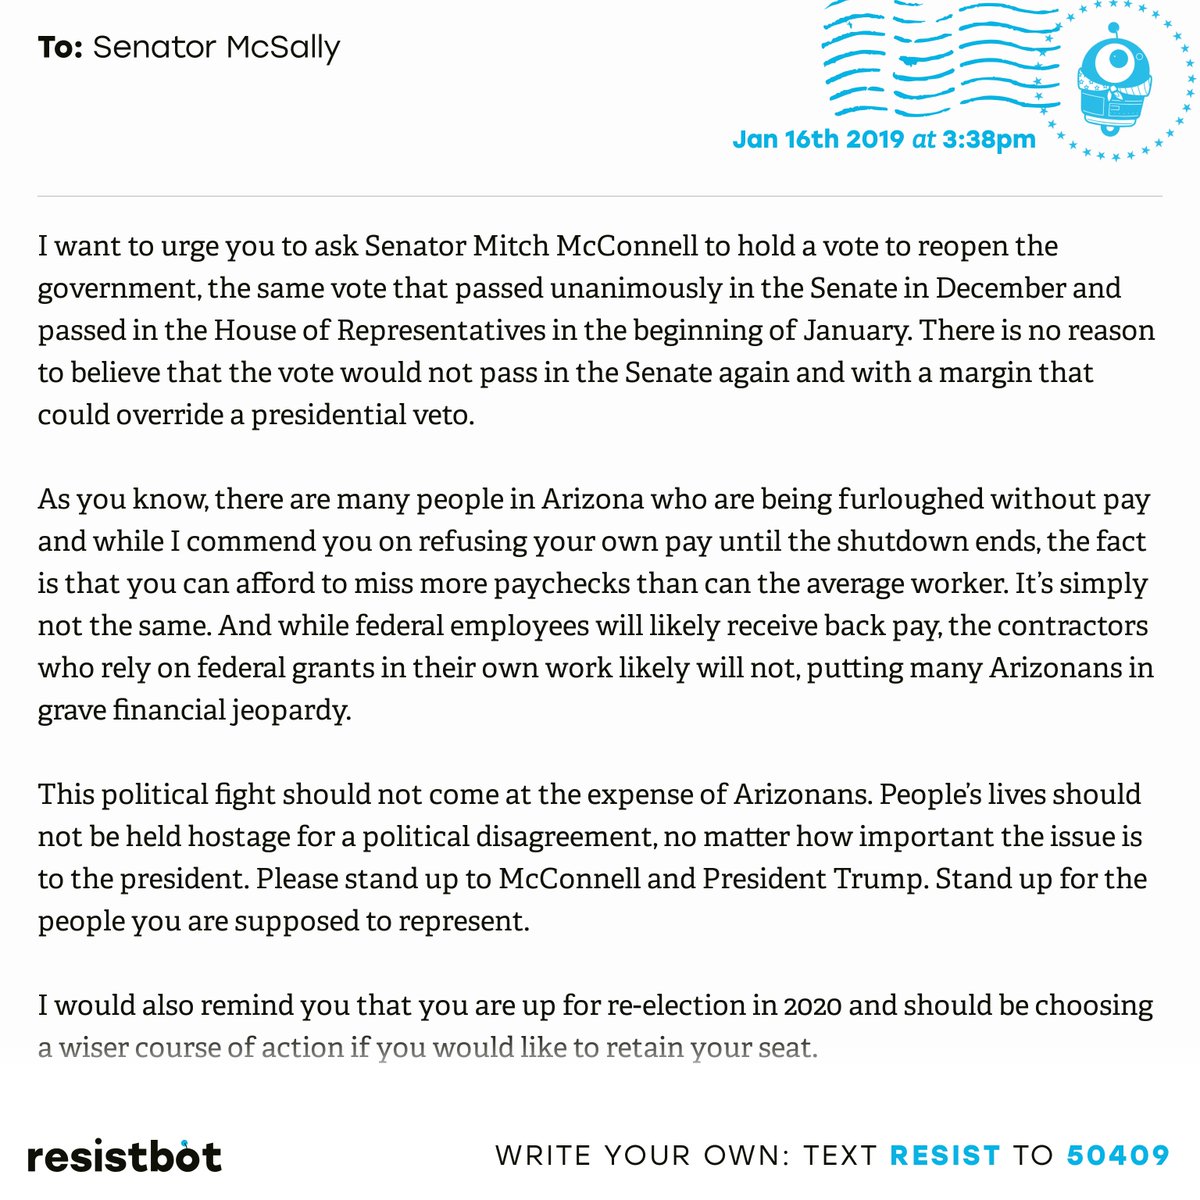 Open Letters auf Twitter: "Here&#22;s an open letter from Monique in